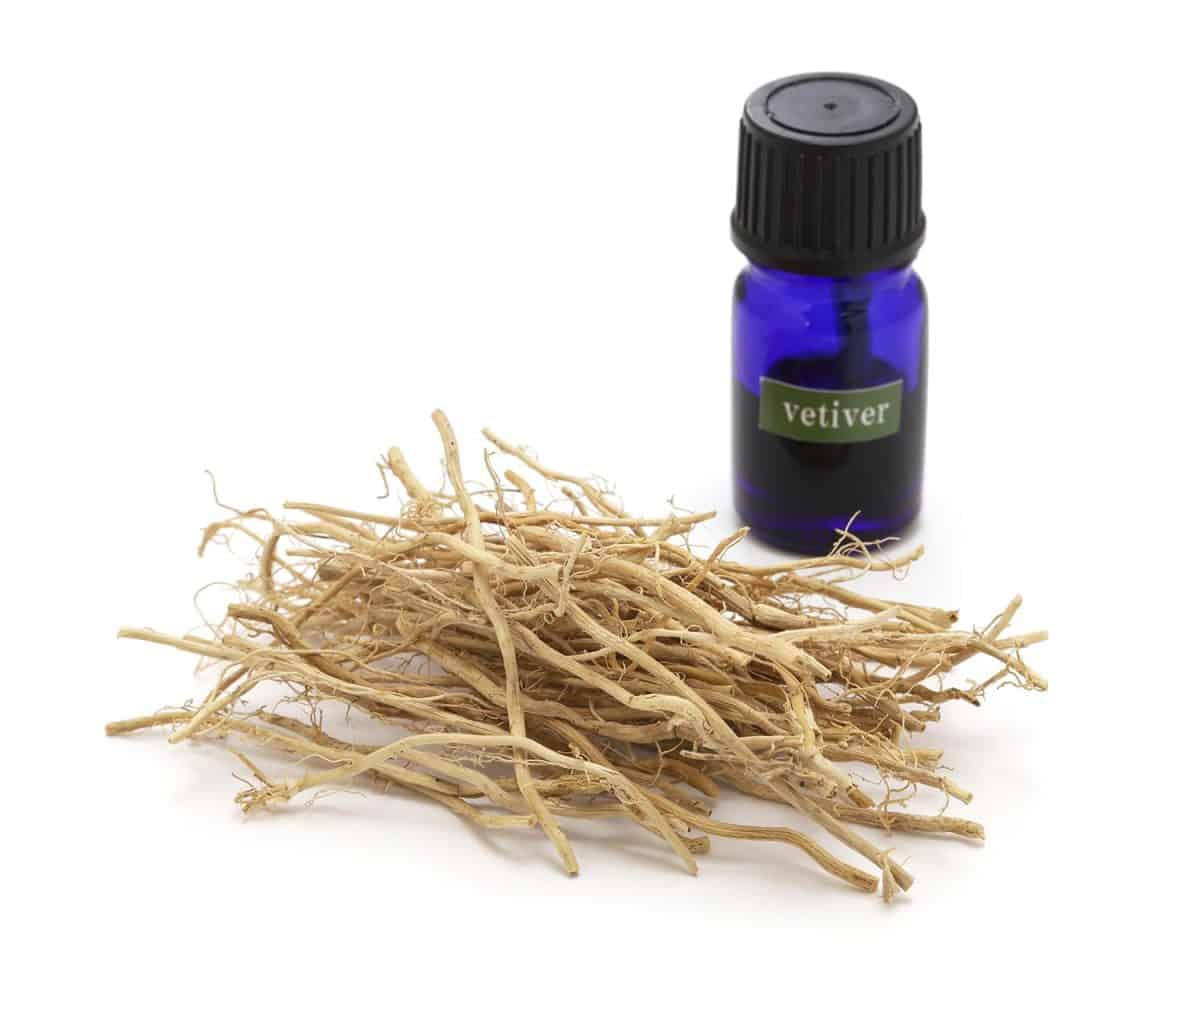 Dried vetiver roots and vetiver essential oil in a glass vial